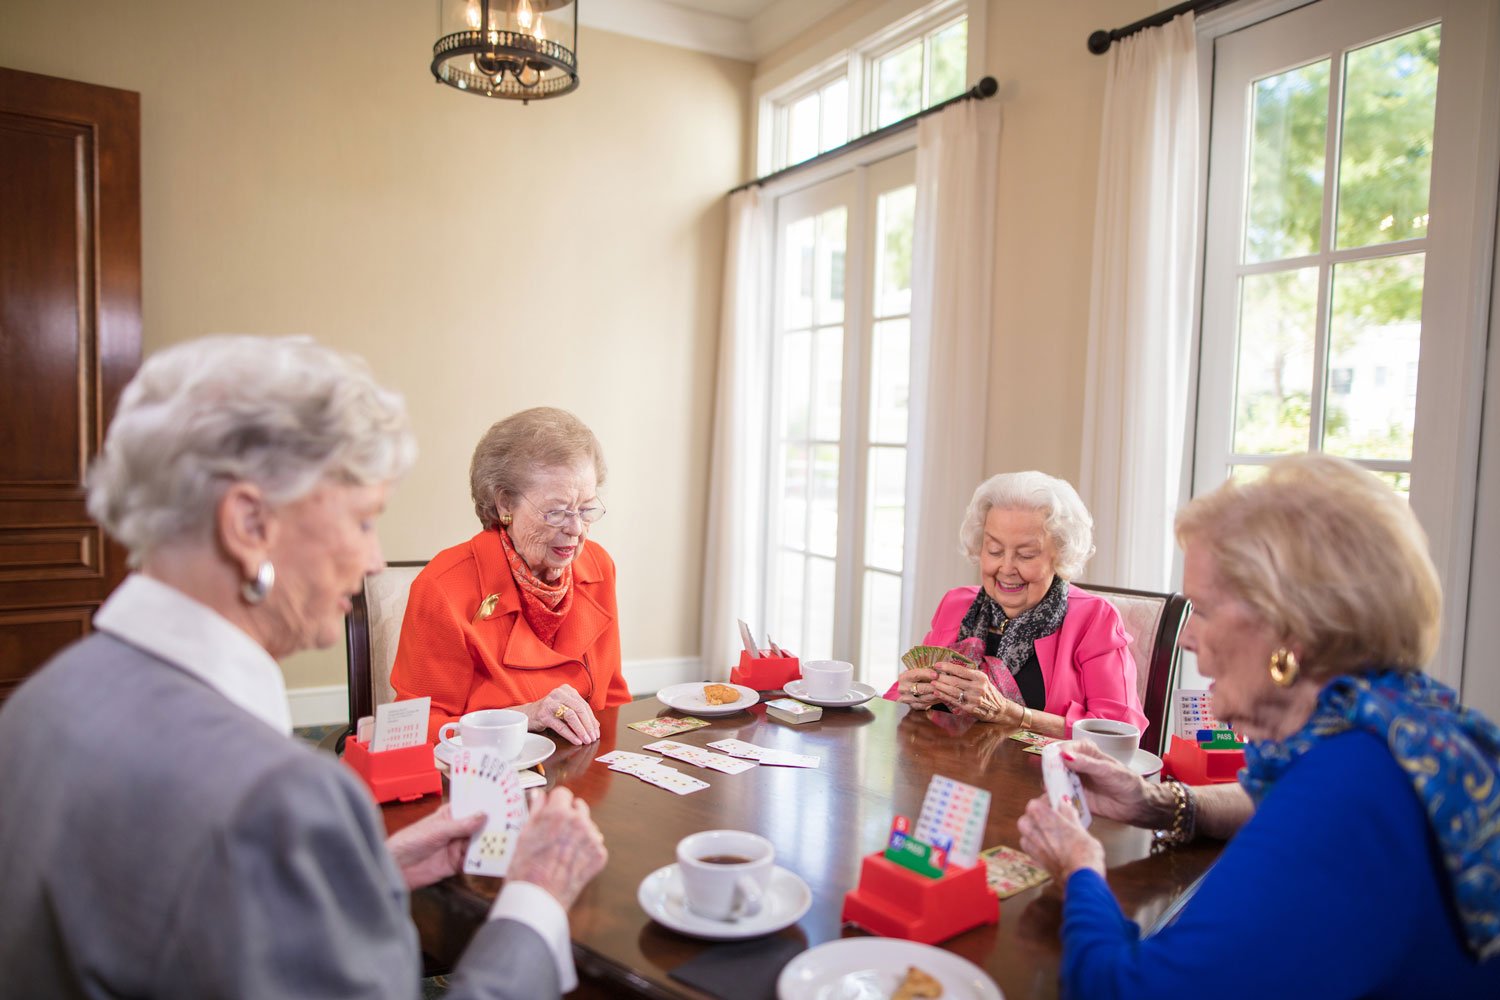 Small group of senior women seated at a card table playing a card game together